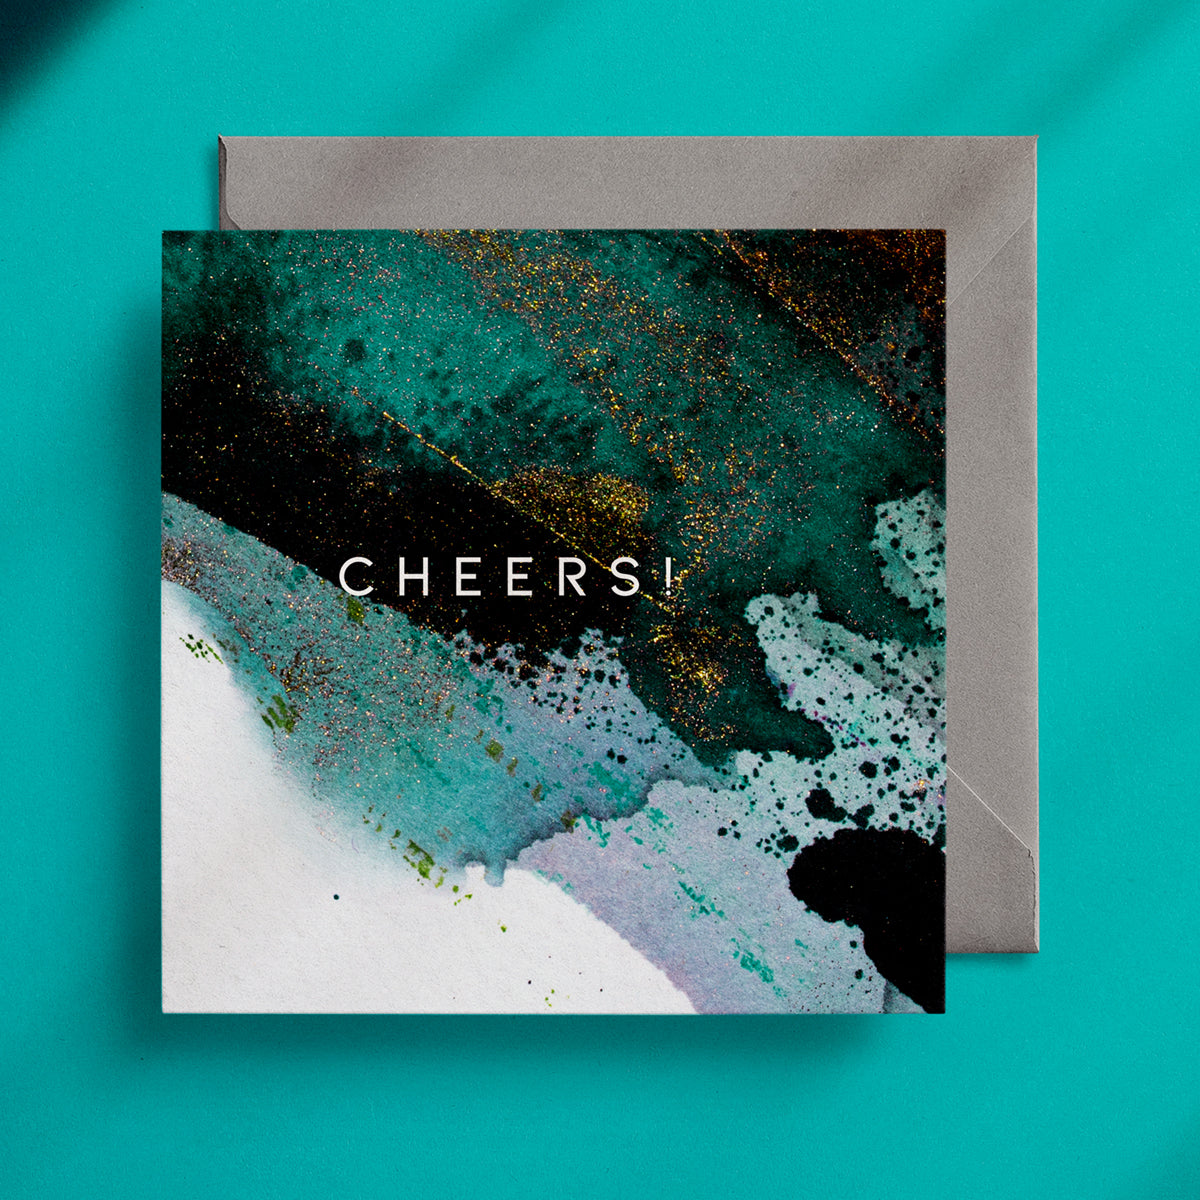 Cheers! - ABSTRACT Greeting Card